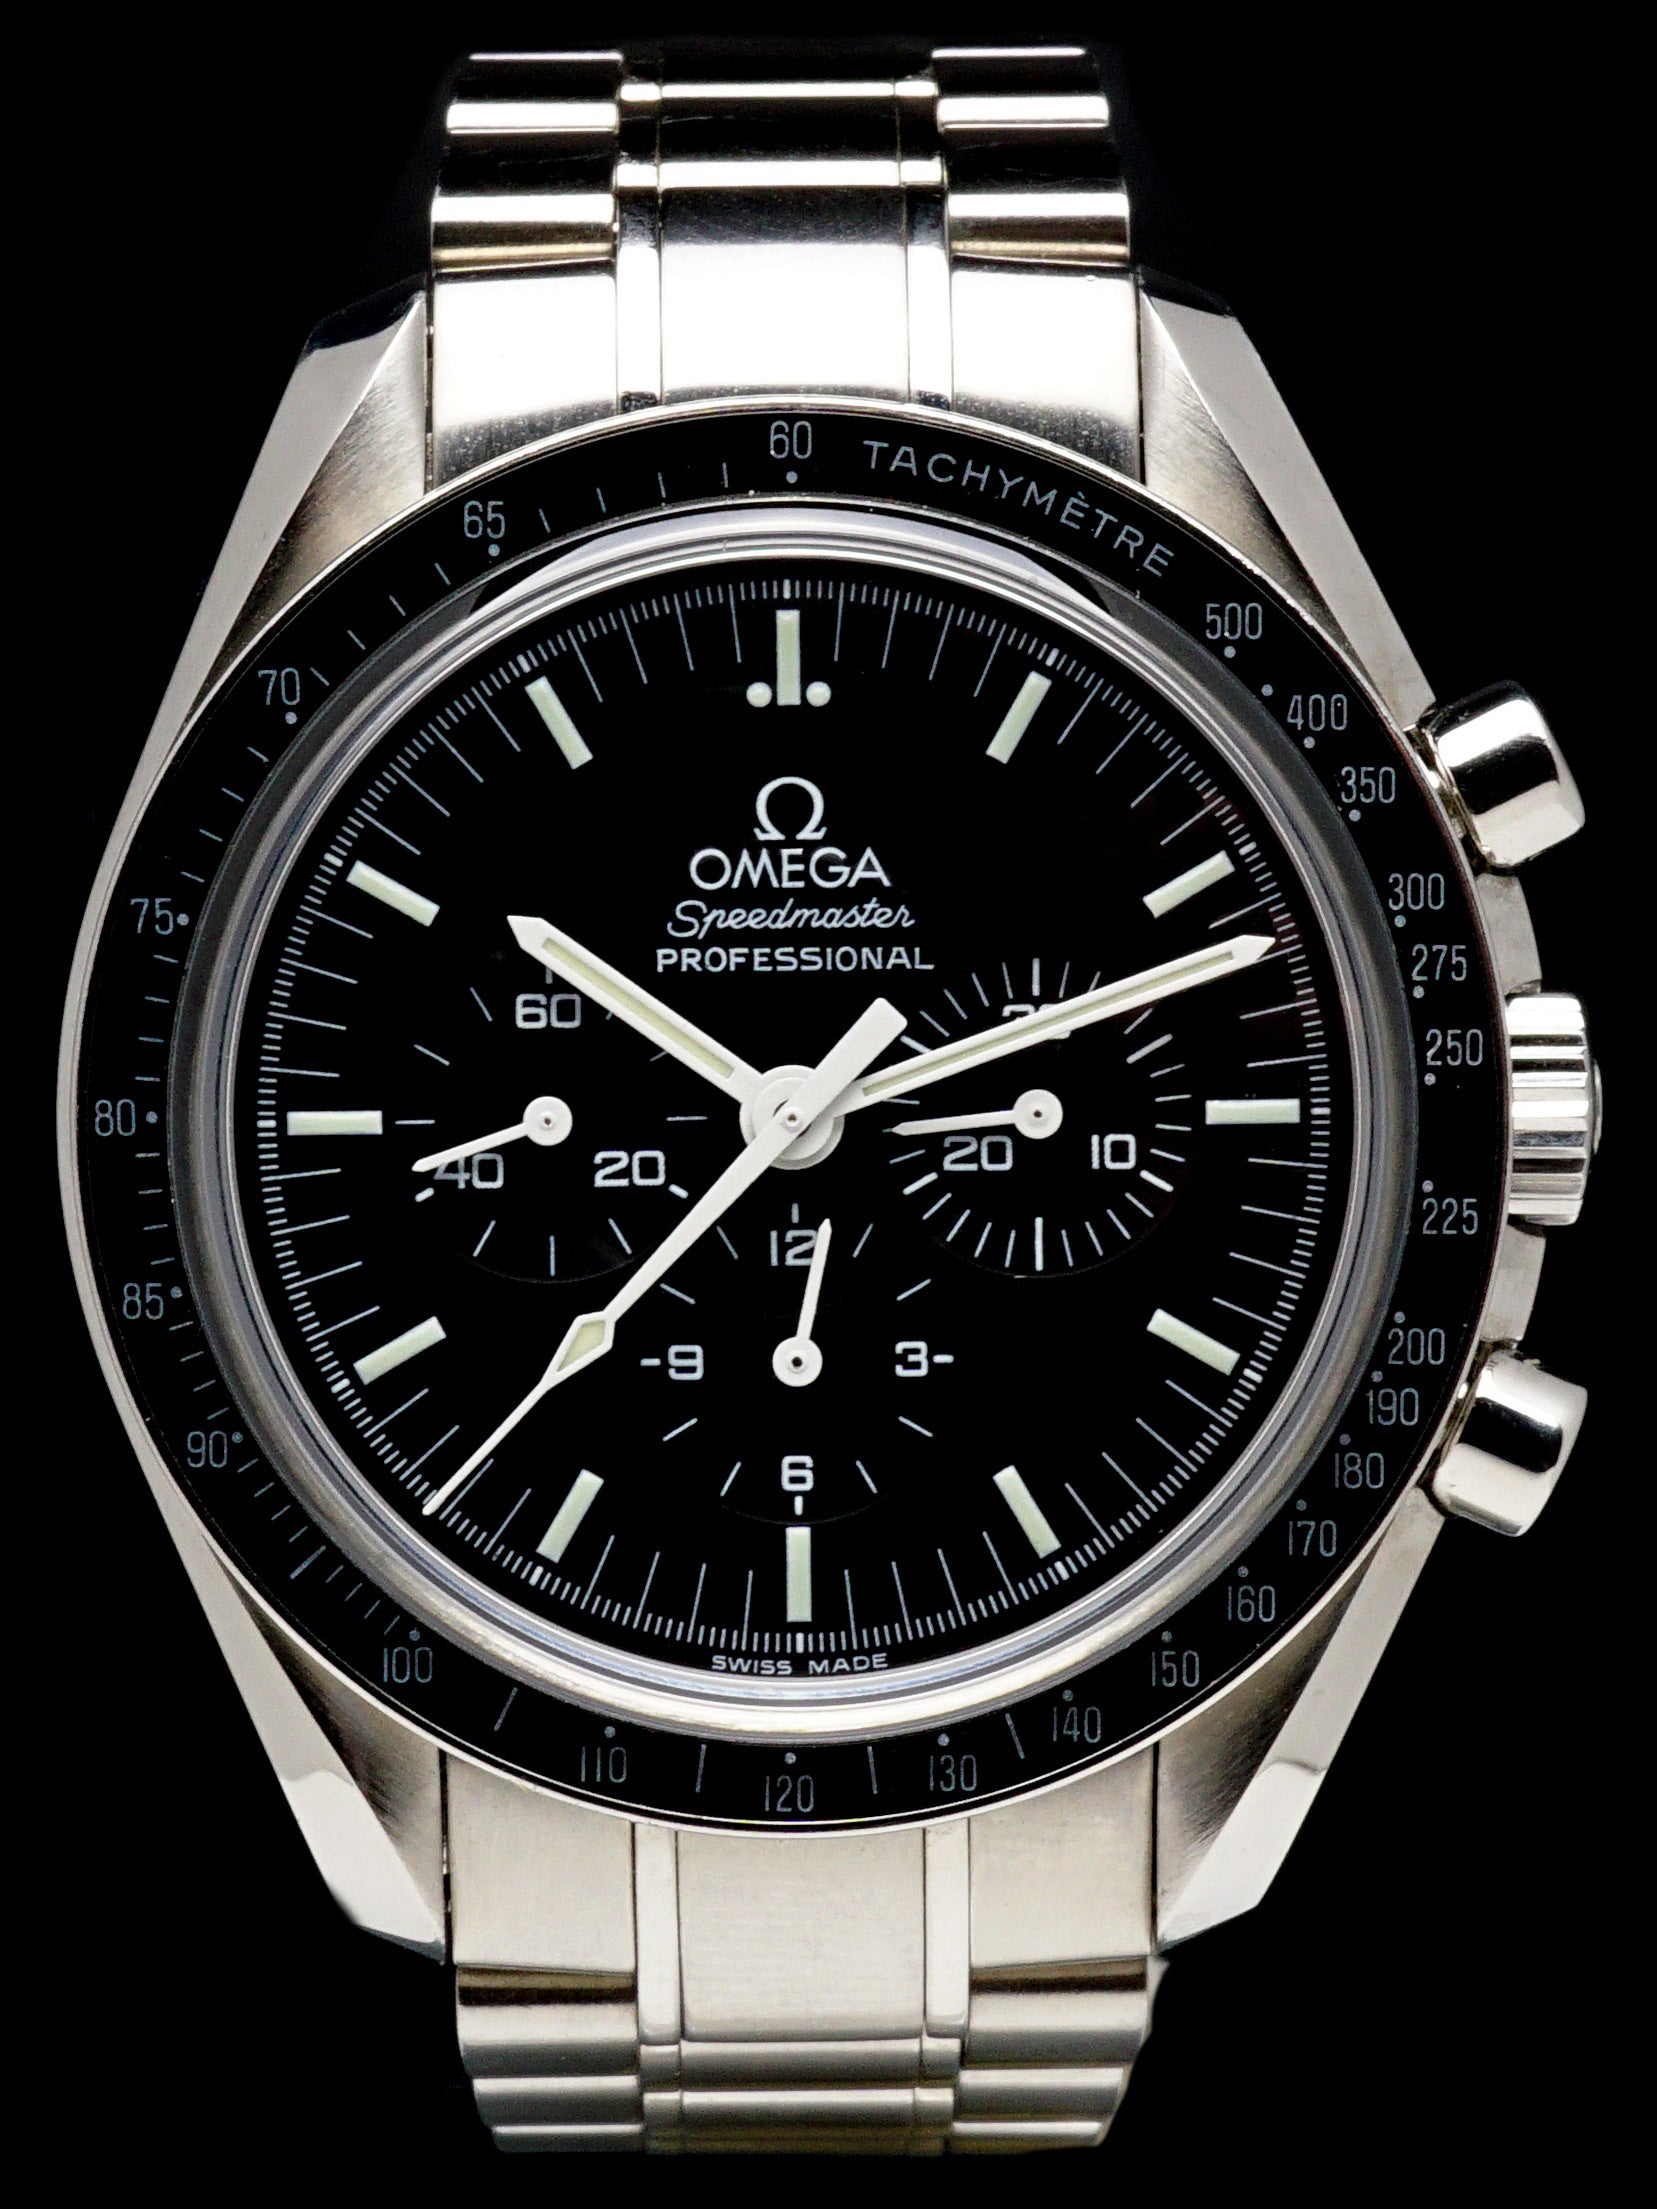 2011 OMEGA Speedmaster Professional (Ref. 3573.50.00) "Sapphire Sandwich" W/ Box and Papers